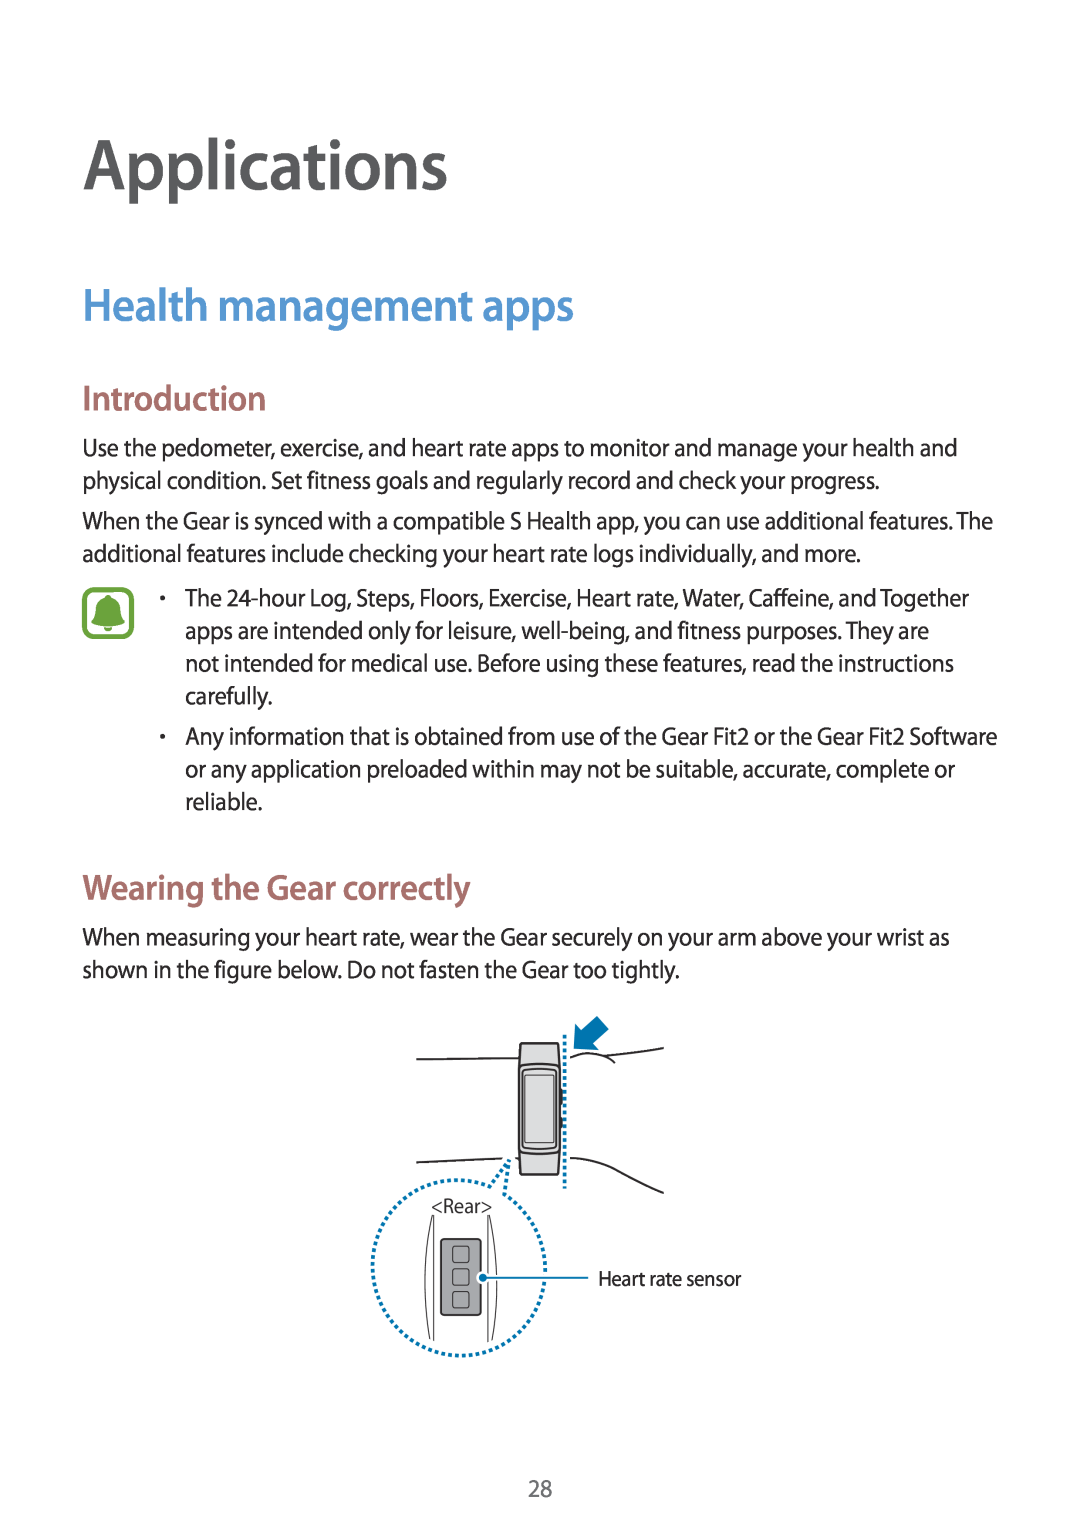 Samsung SM-R3600DAAROM, SM-R3600ZBADBT manual Applications, Health management apps, Wearing the Gear correctly, Introduction 